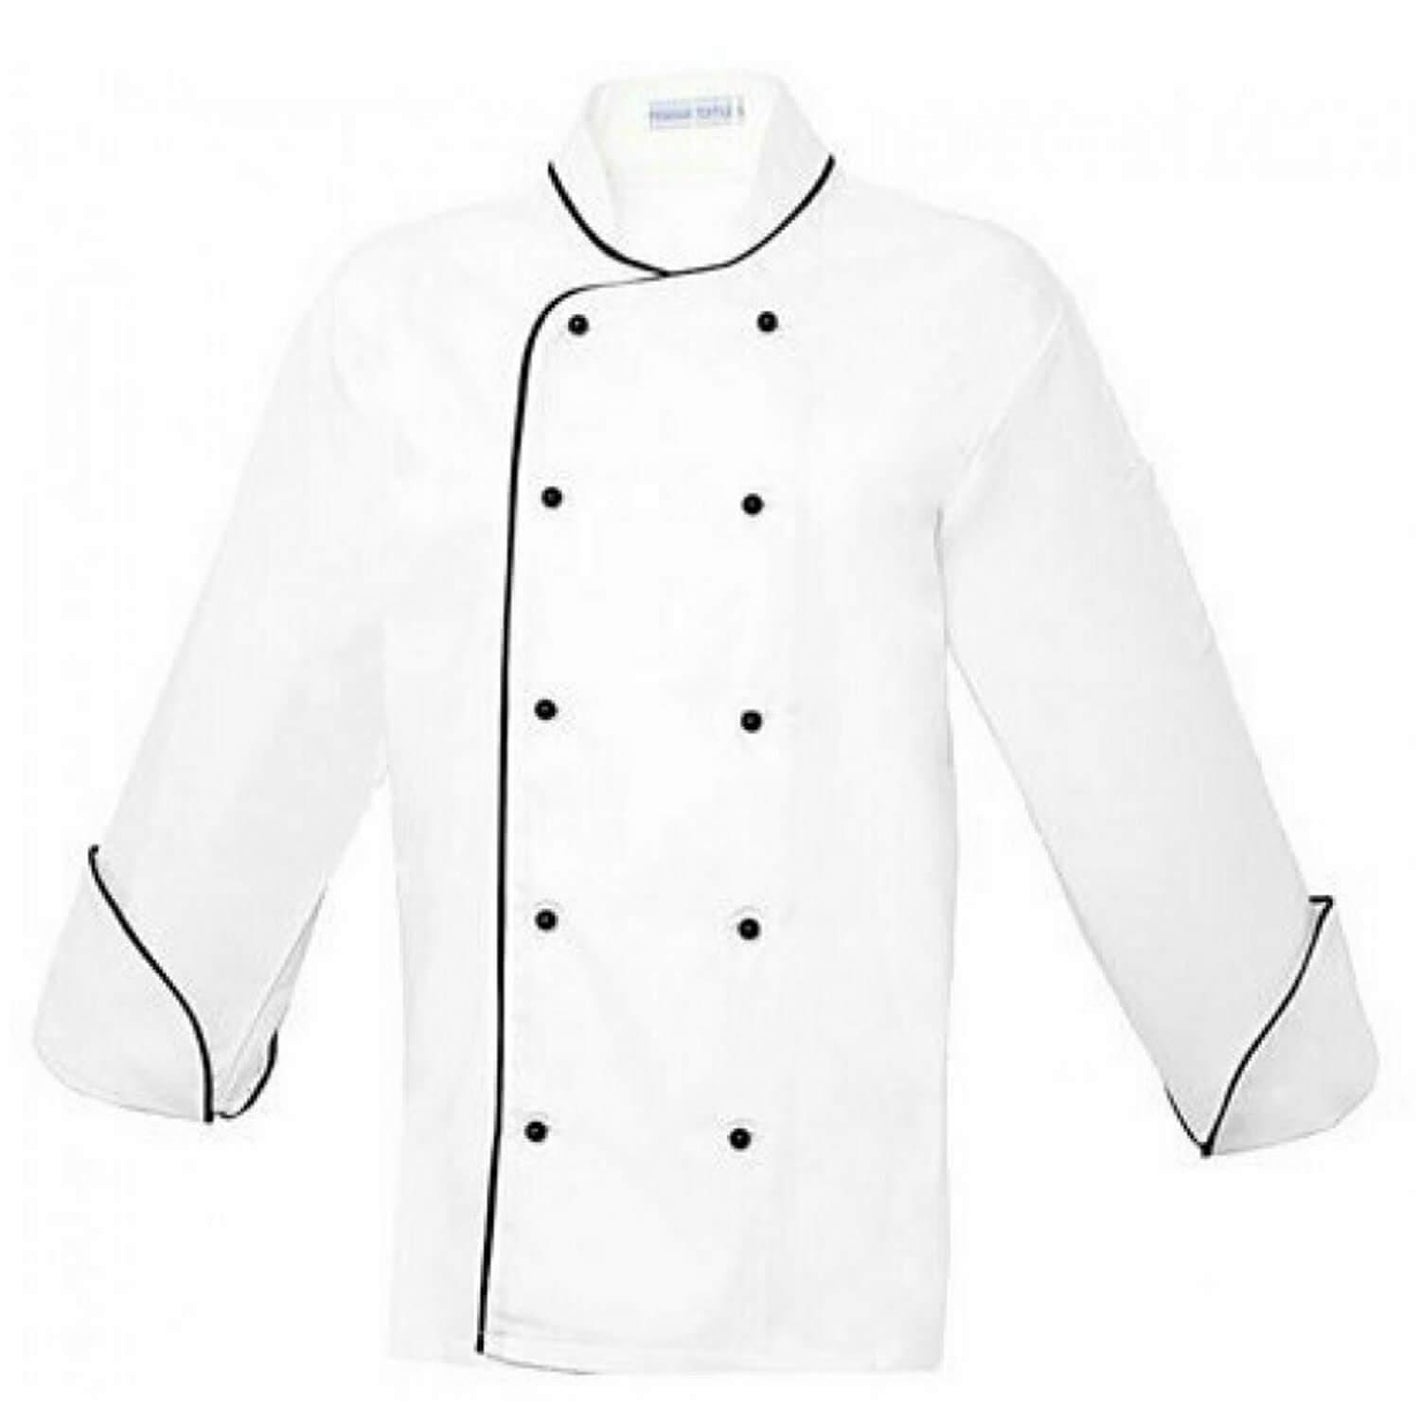 Pegasus Executive White Long Sleeve Chef Jackets with Black Piping